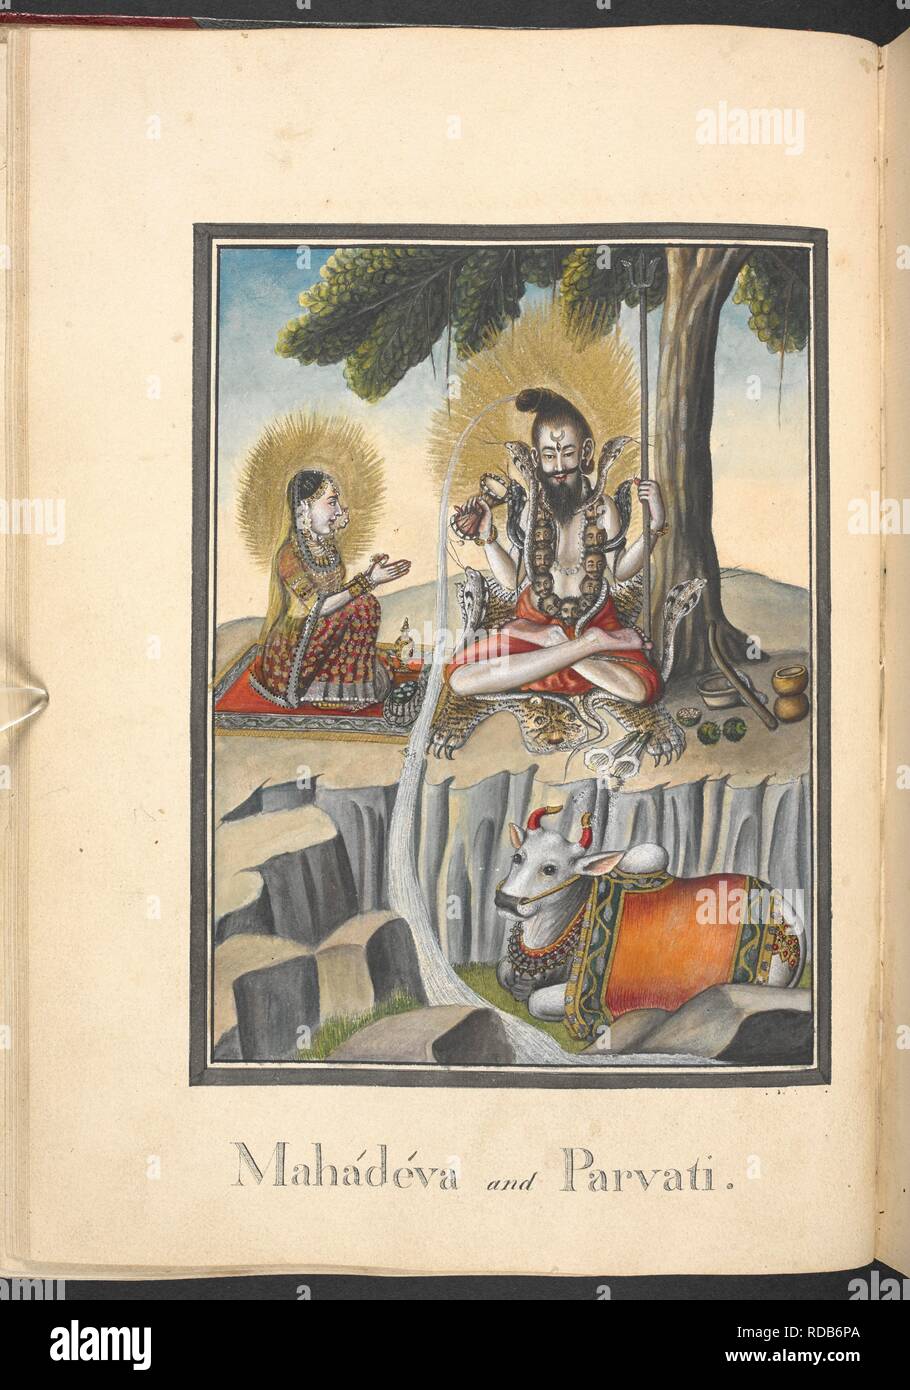 Shiva and Parvati. Inscribed: â€˜Mahadeva and Parvati.â€™. 61 paintings illustrating the Adhyatma Ramayana, vol. 1. [Boddam collection.]. 1803 - 1804. Source: MSS Eur C116/1 f.31v. Author: ANON. Stock Photo